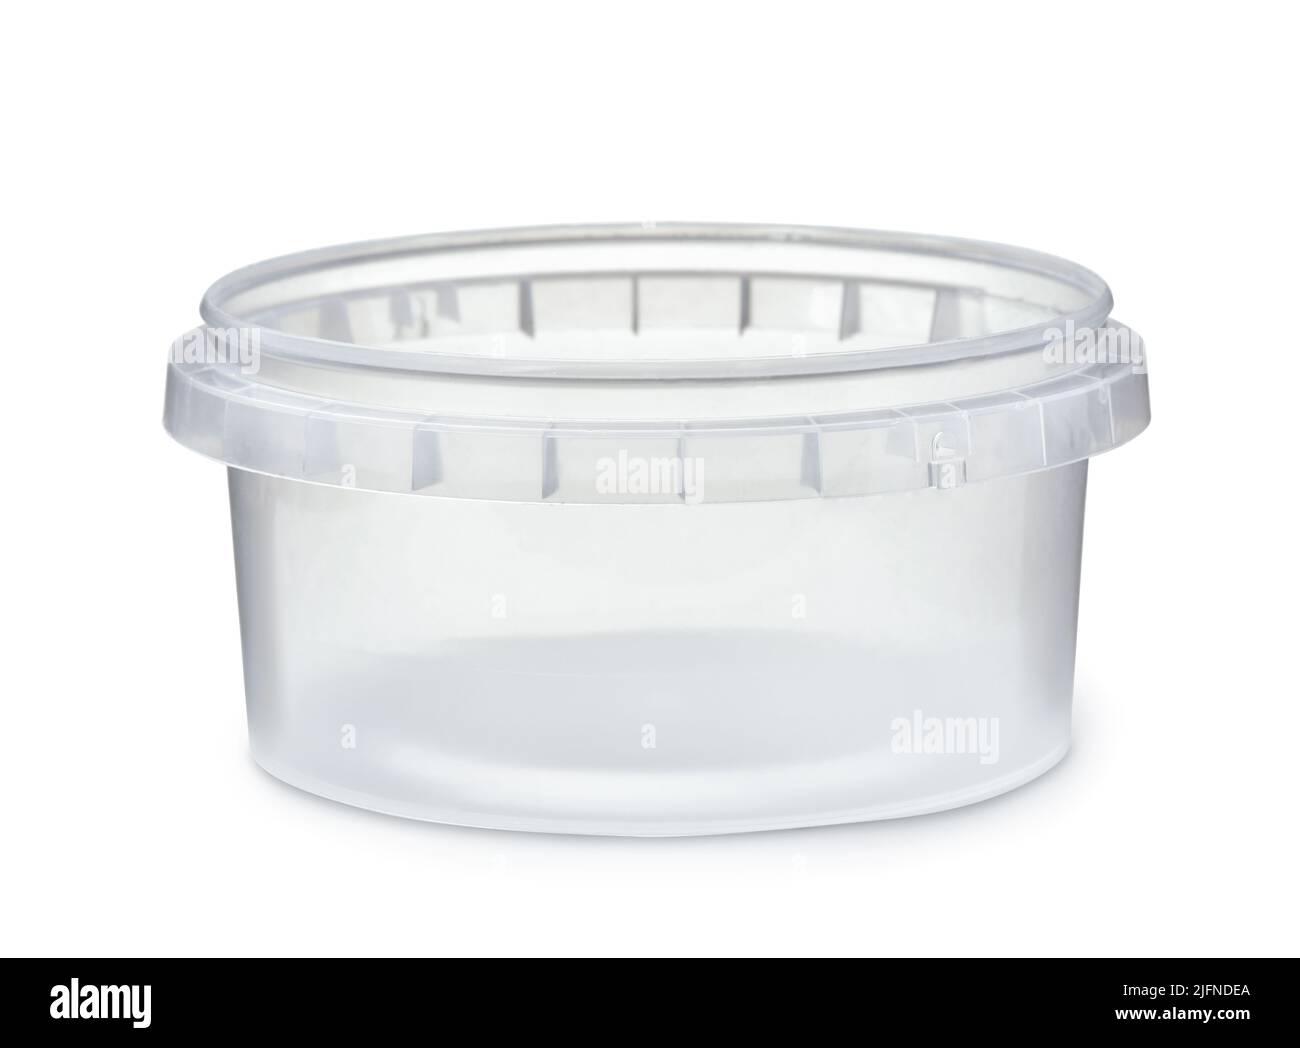 https://c8.alamy.com/comp/2JFNDEA/front-view-of-open-round-plastic-disposable-food-container-isolated-on-white-2JFNDEA.jpg